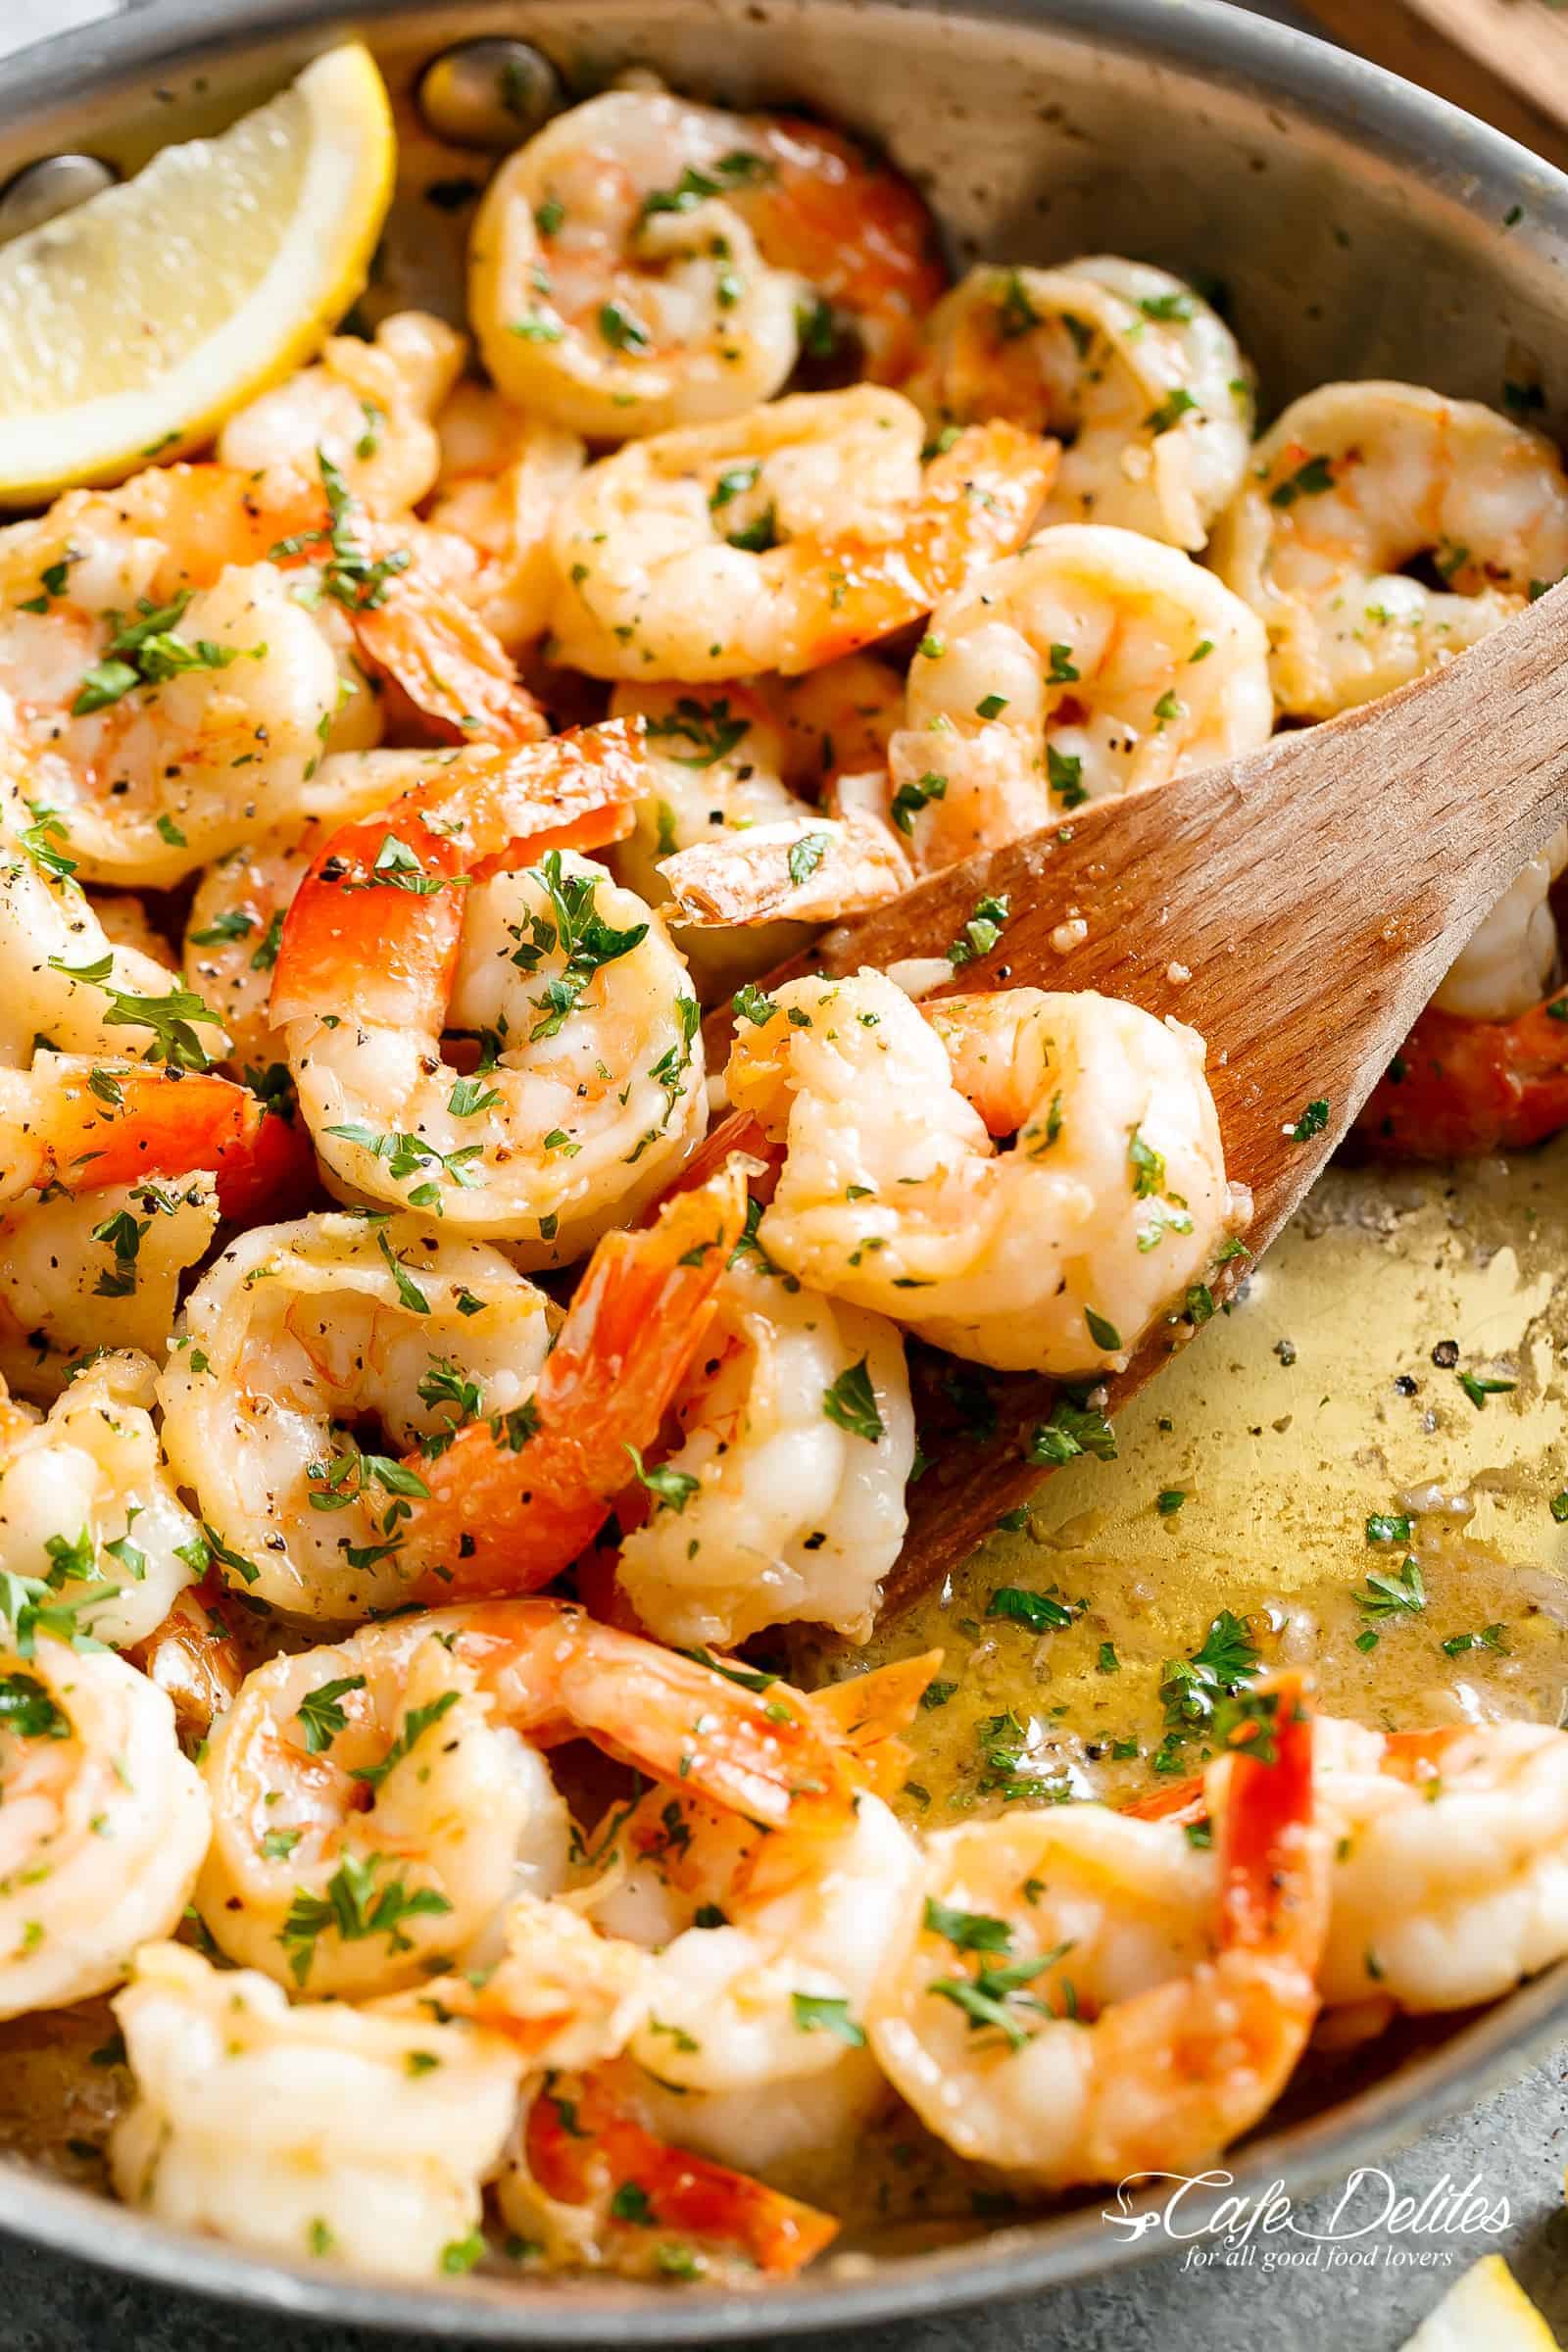 Red Lobster Shrimp Scampi Recipe Without Wine - BHe